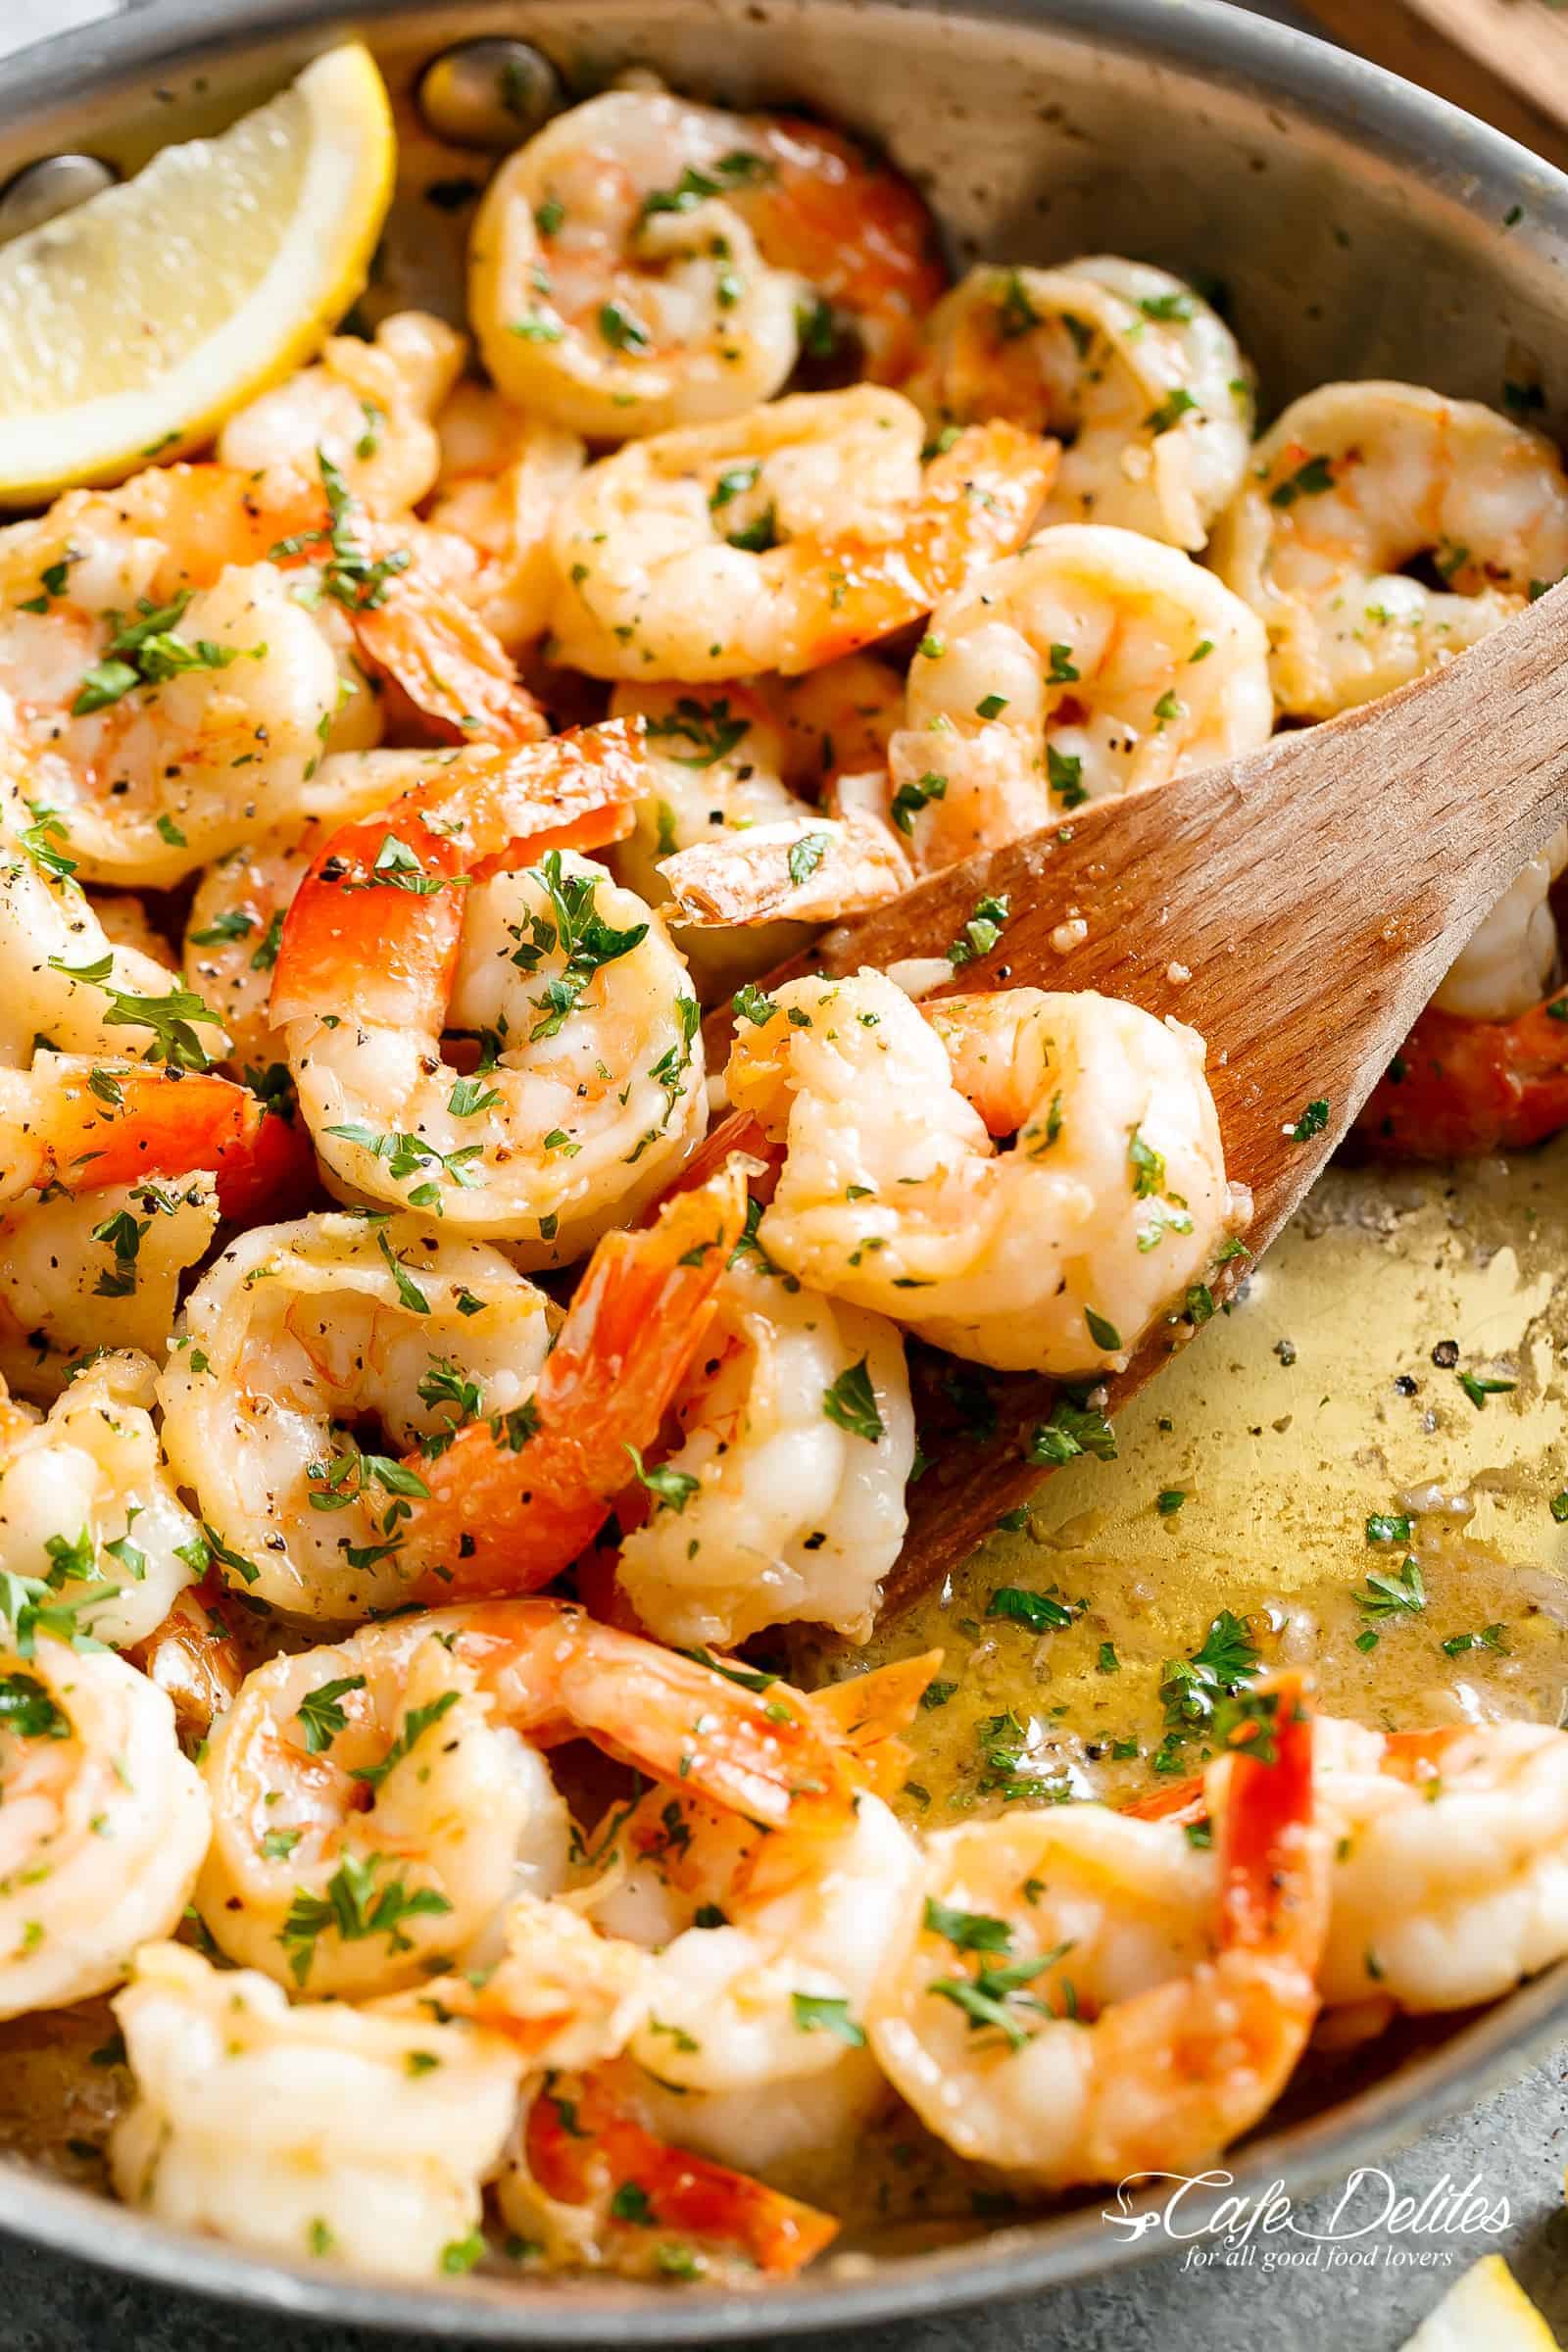 Red Lobster Shrimp Scampi Recipe Without Wine - BHe